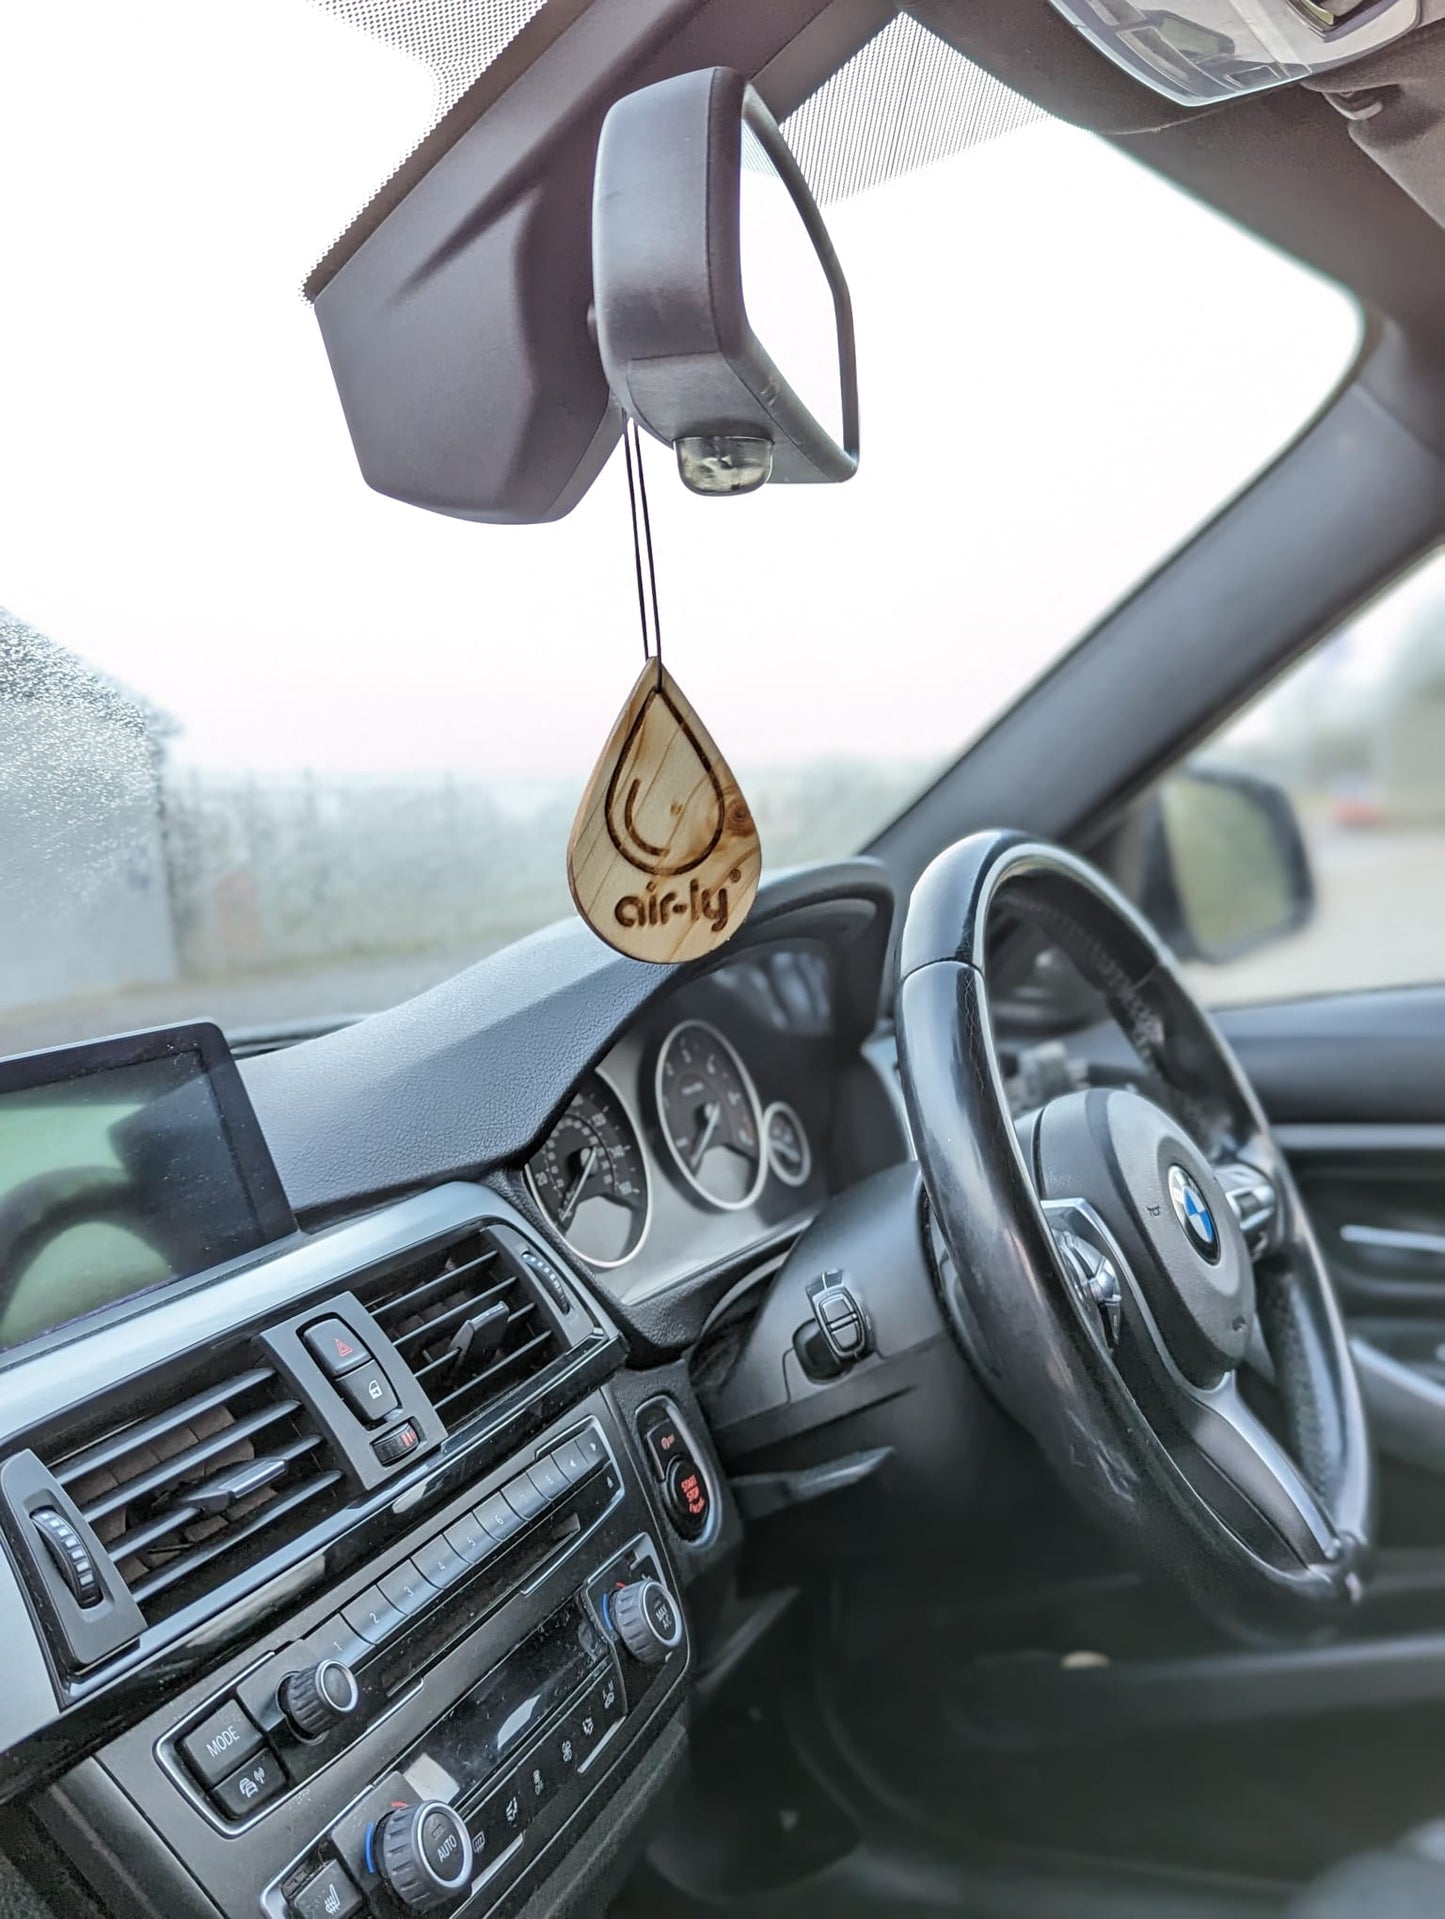 Air-ly Car Air Freshener - Kreed Aventos-ly for Her